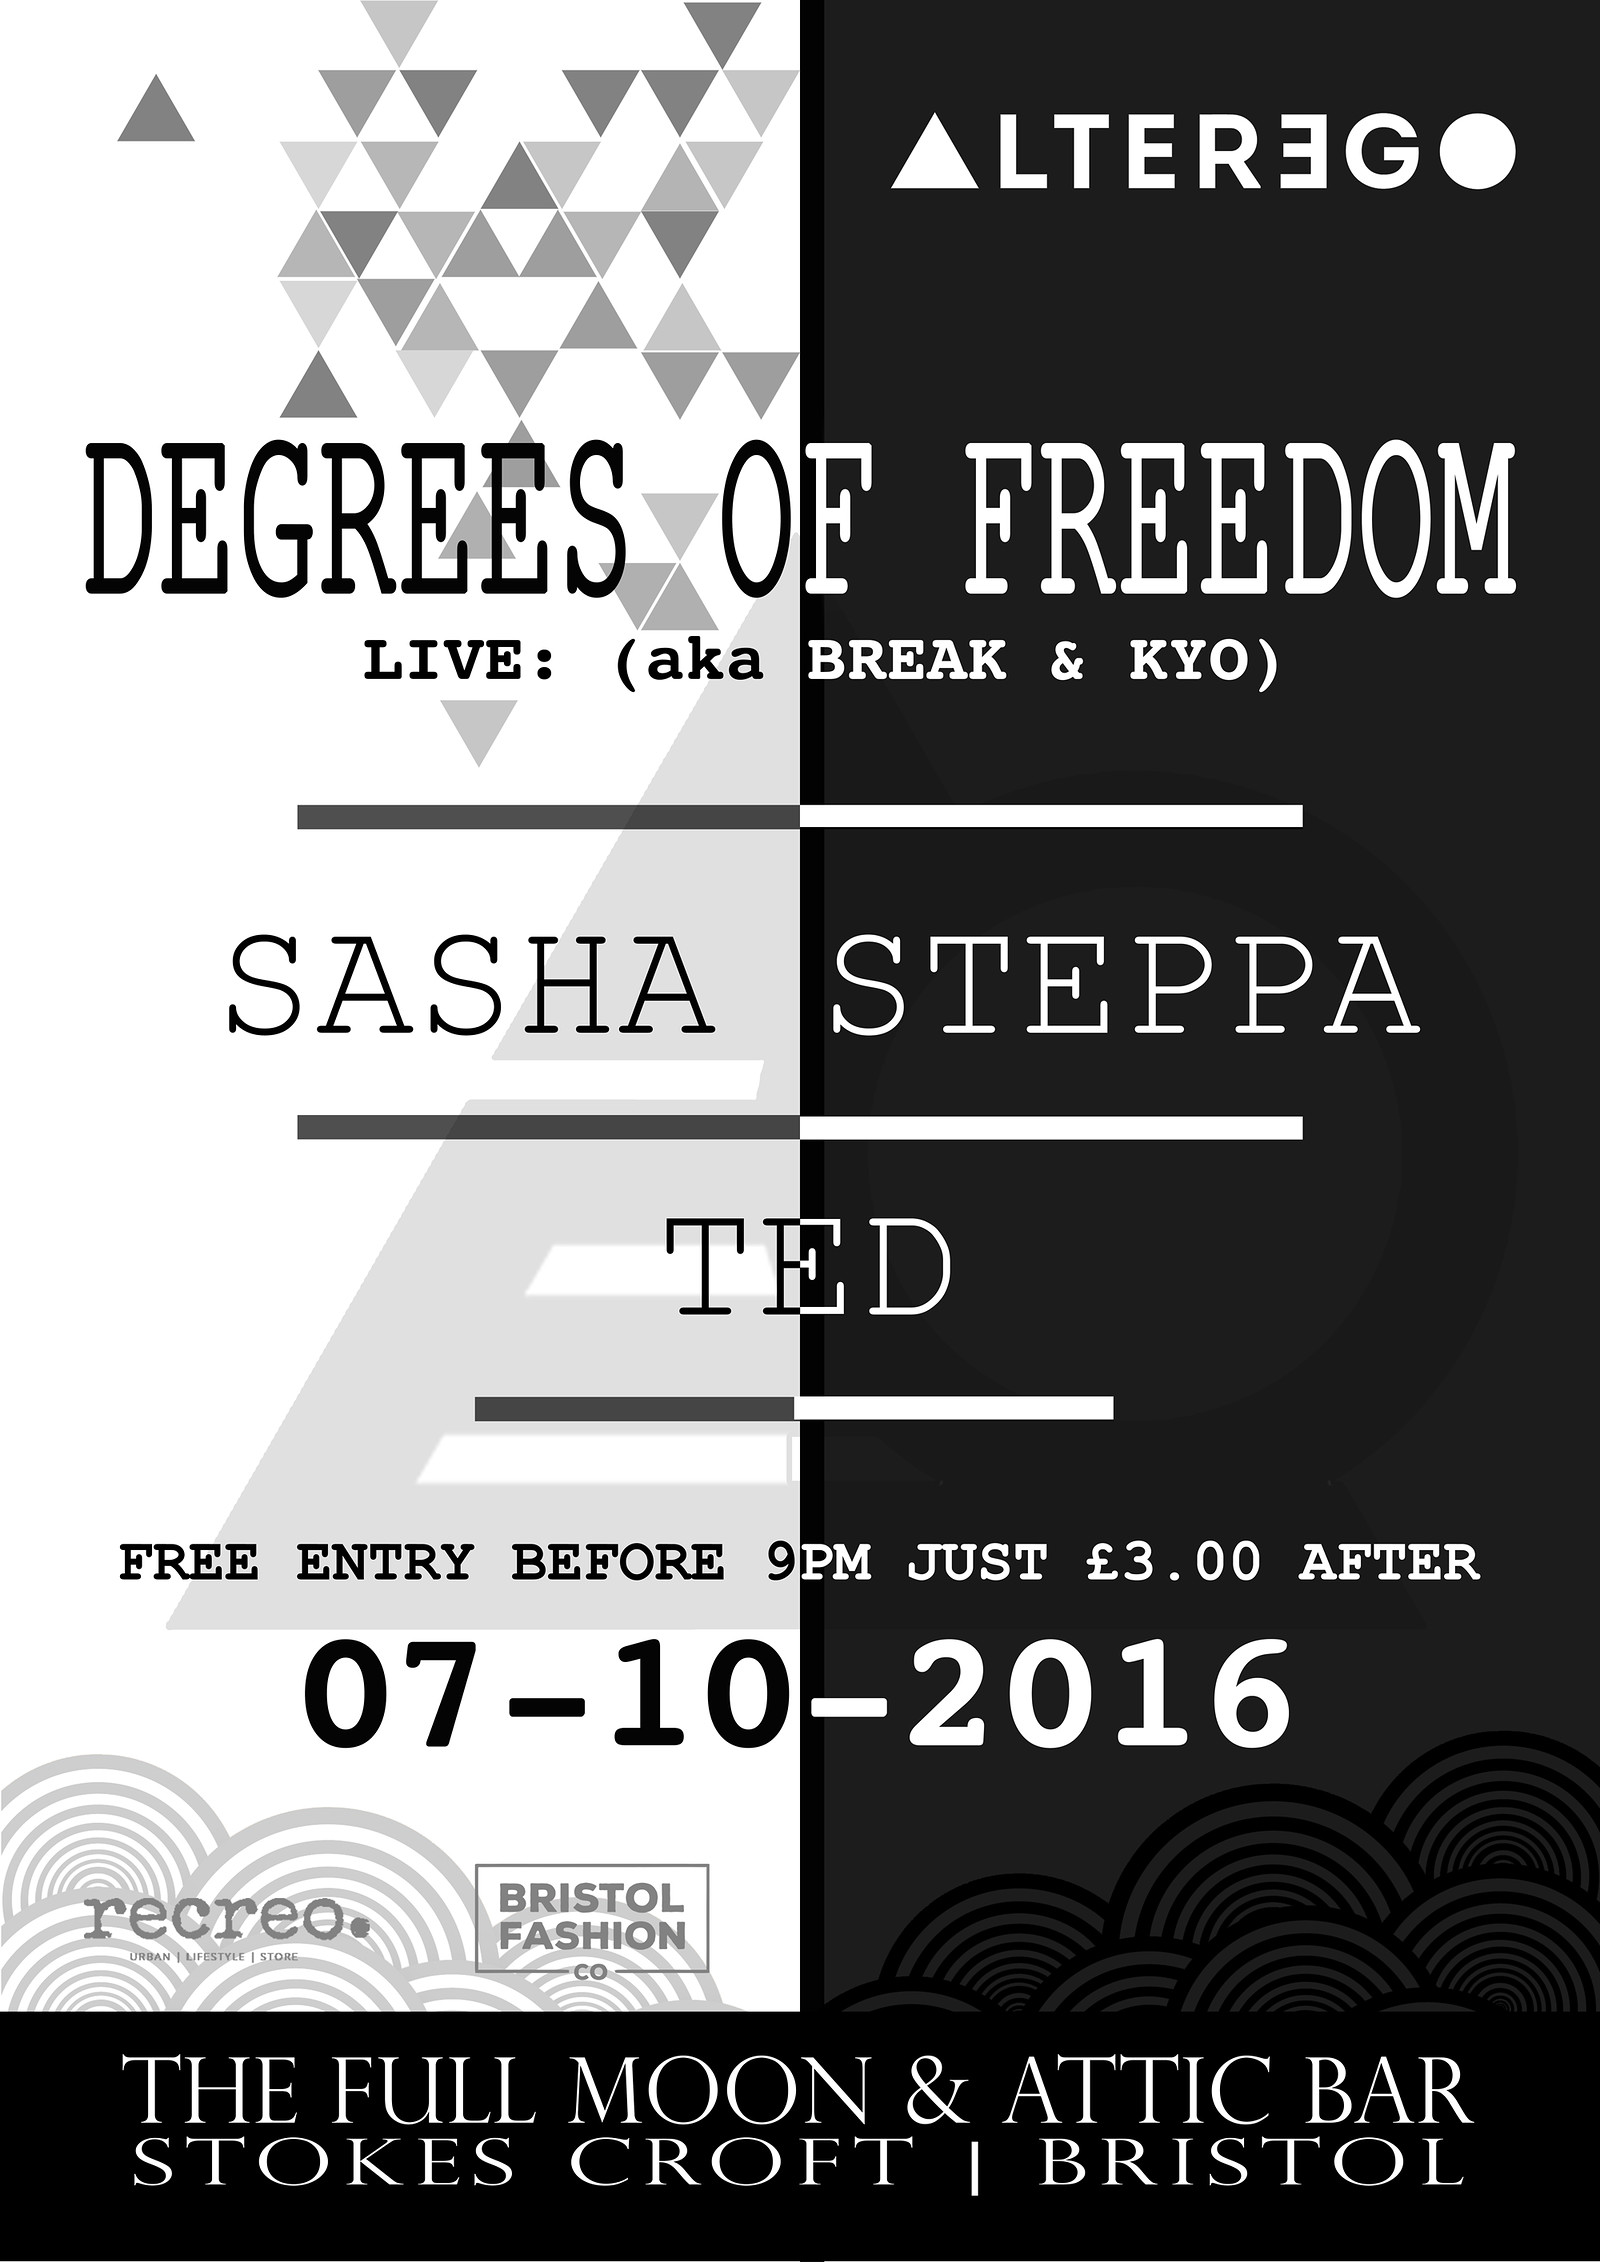 Degree's Of Freedom at The Attic Bar